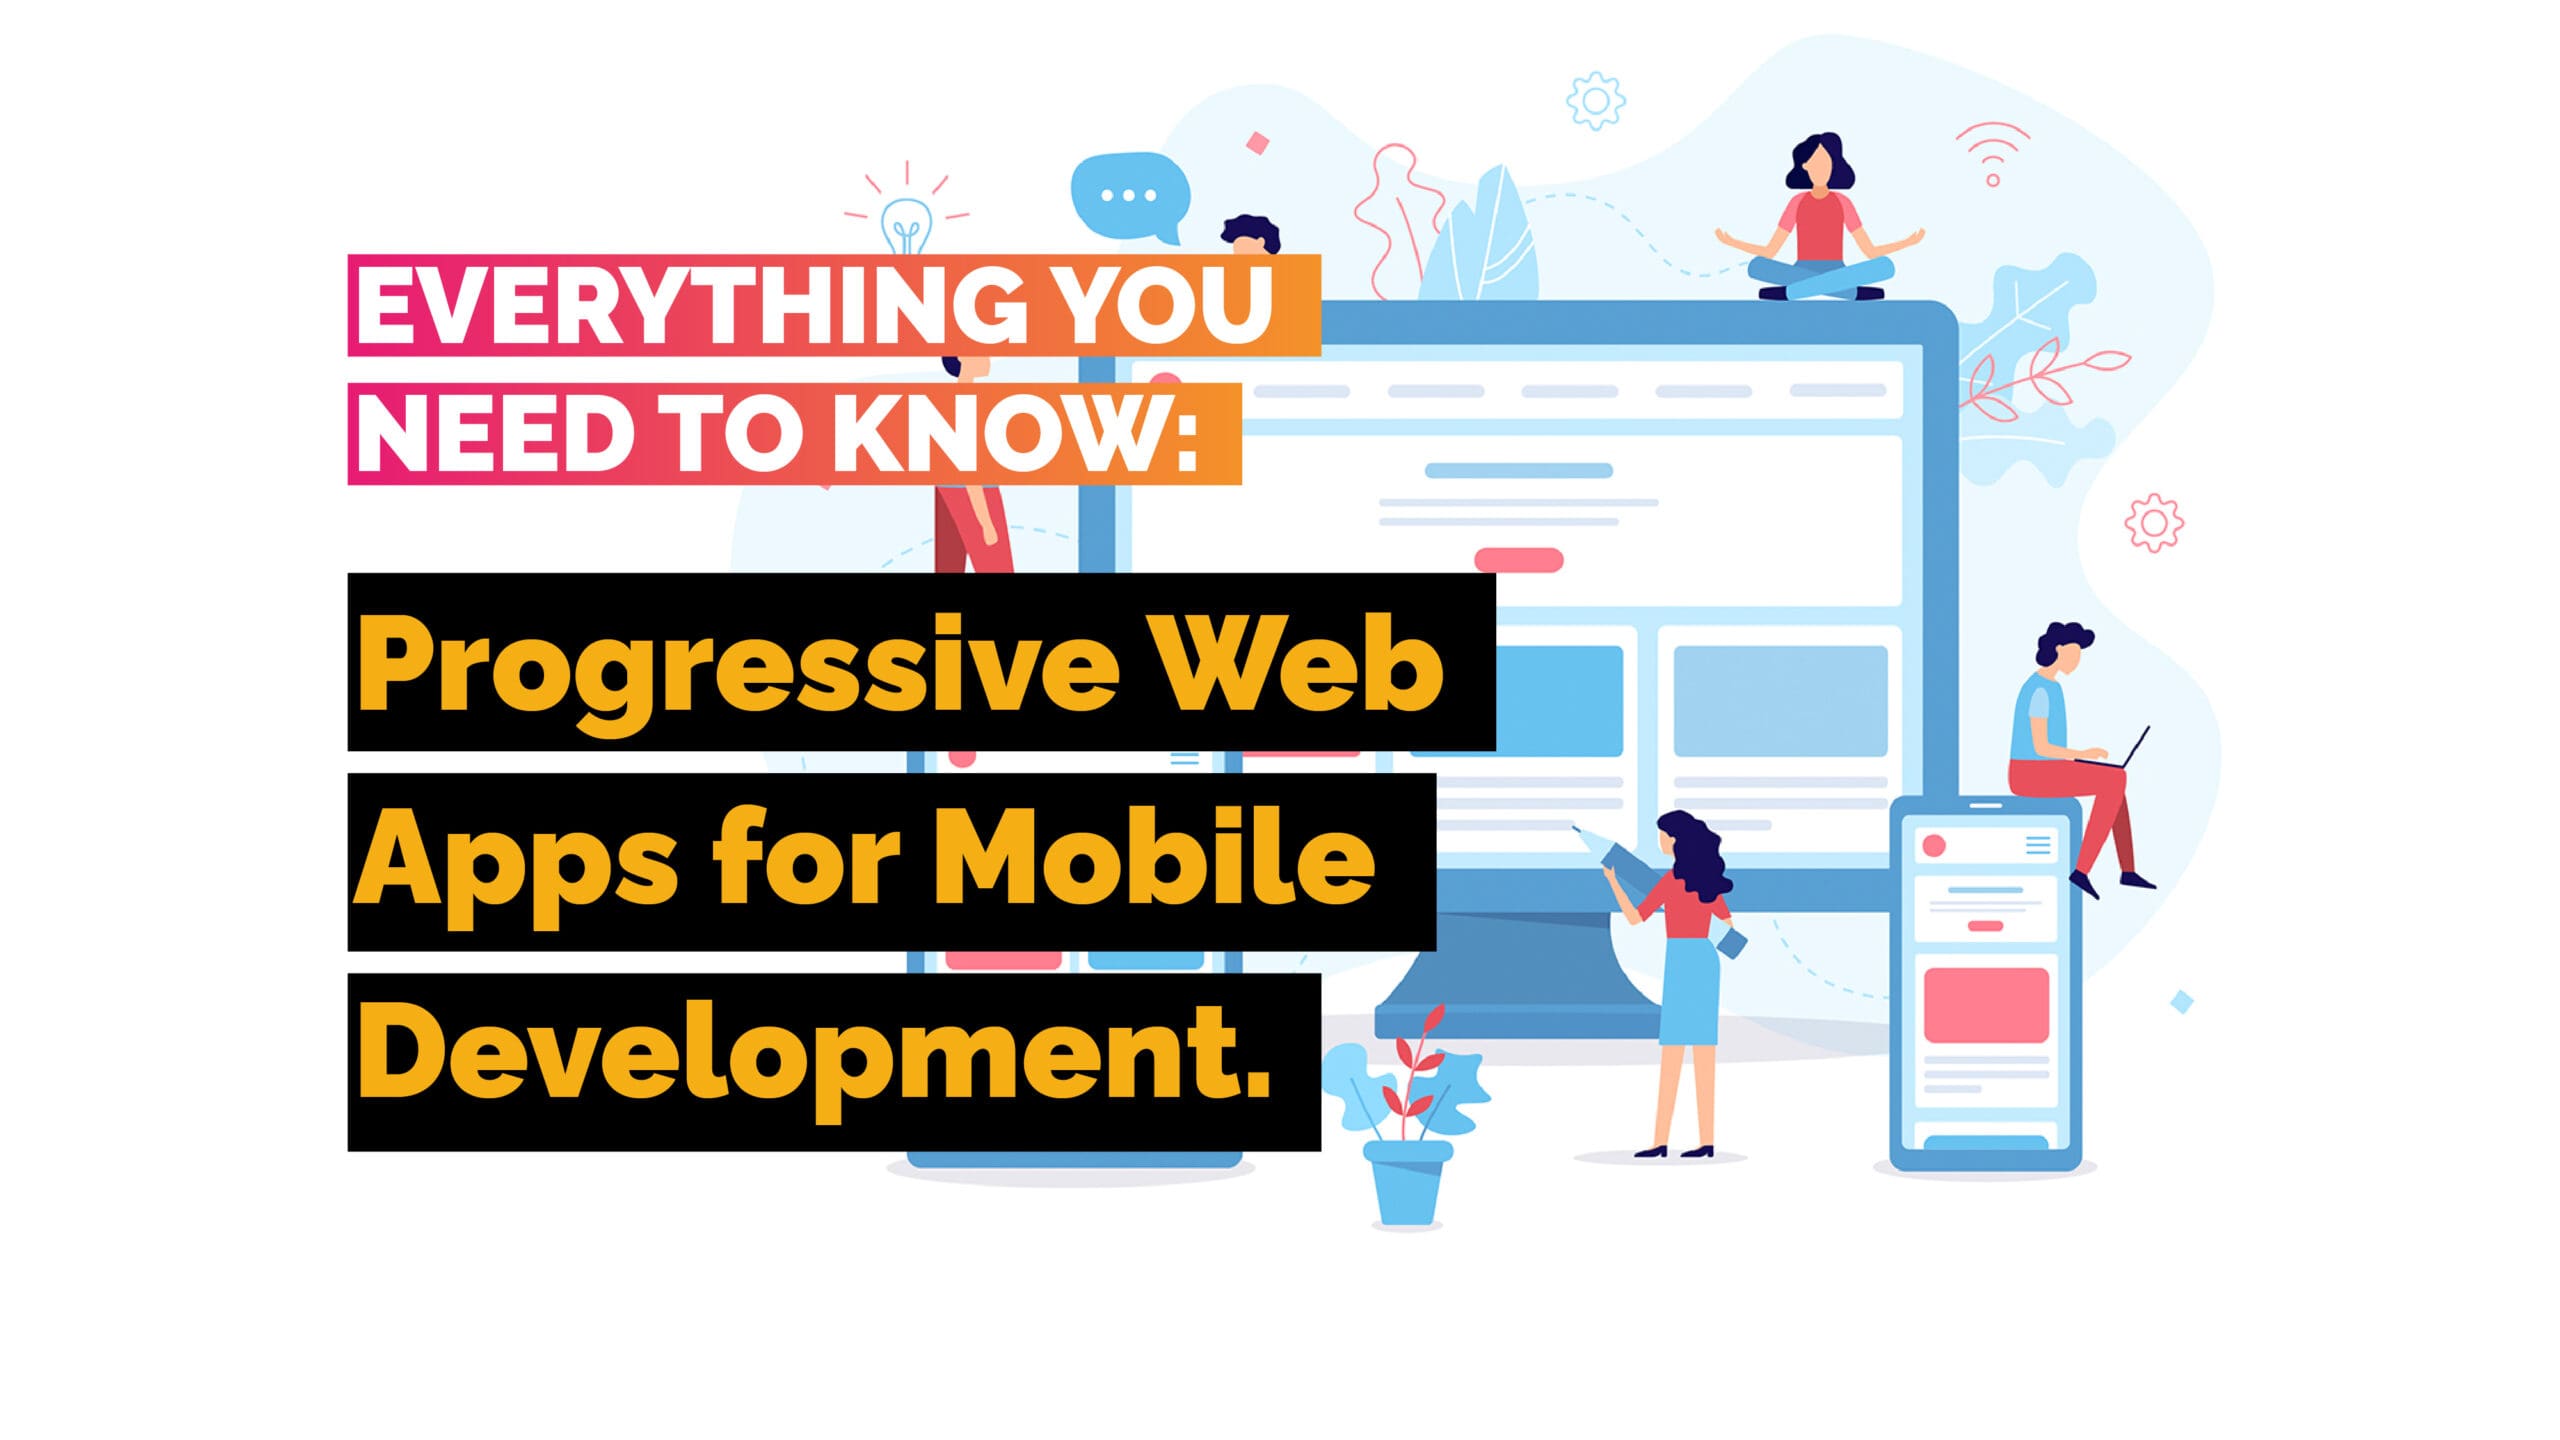 Everything You Need to Know About Progressive Web Apps for Mobile Development